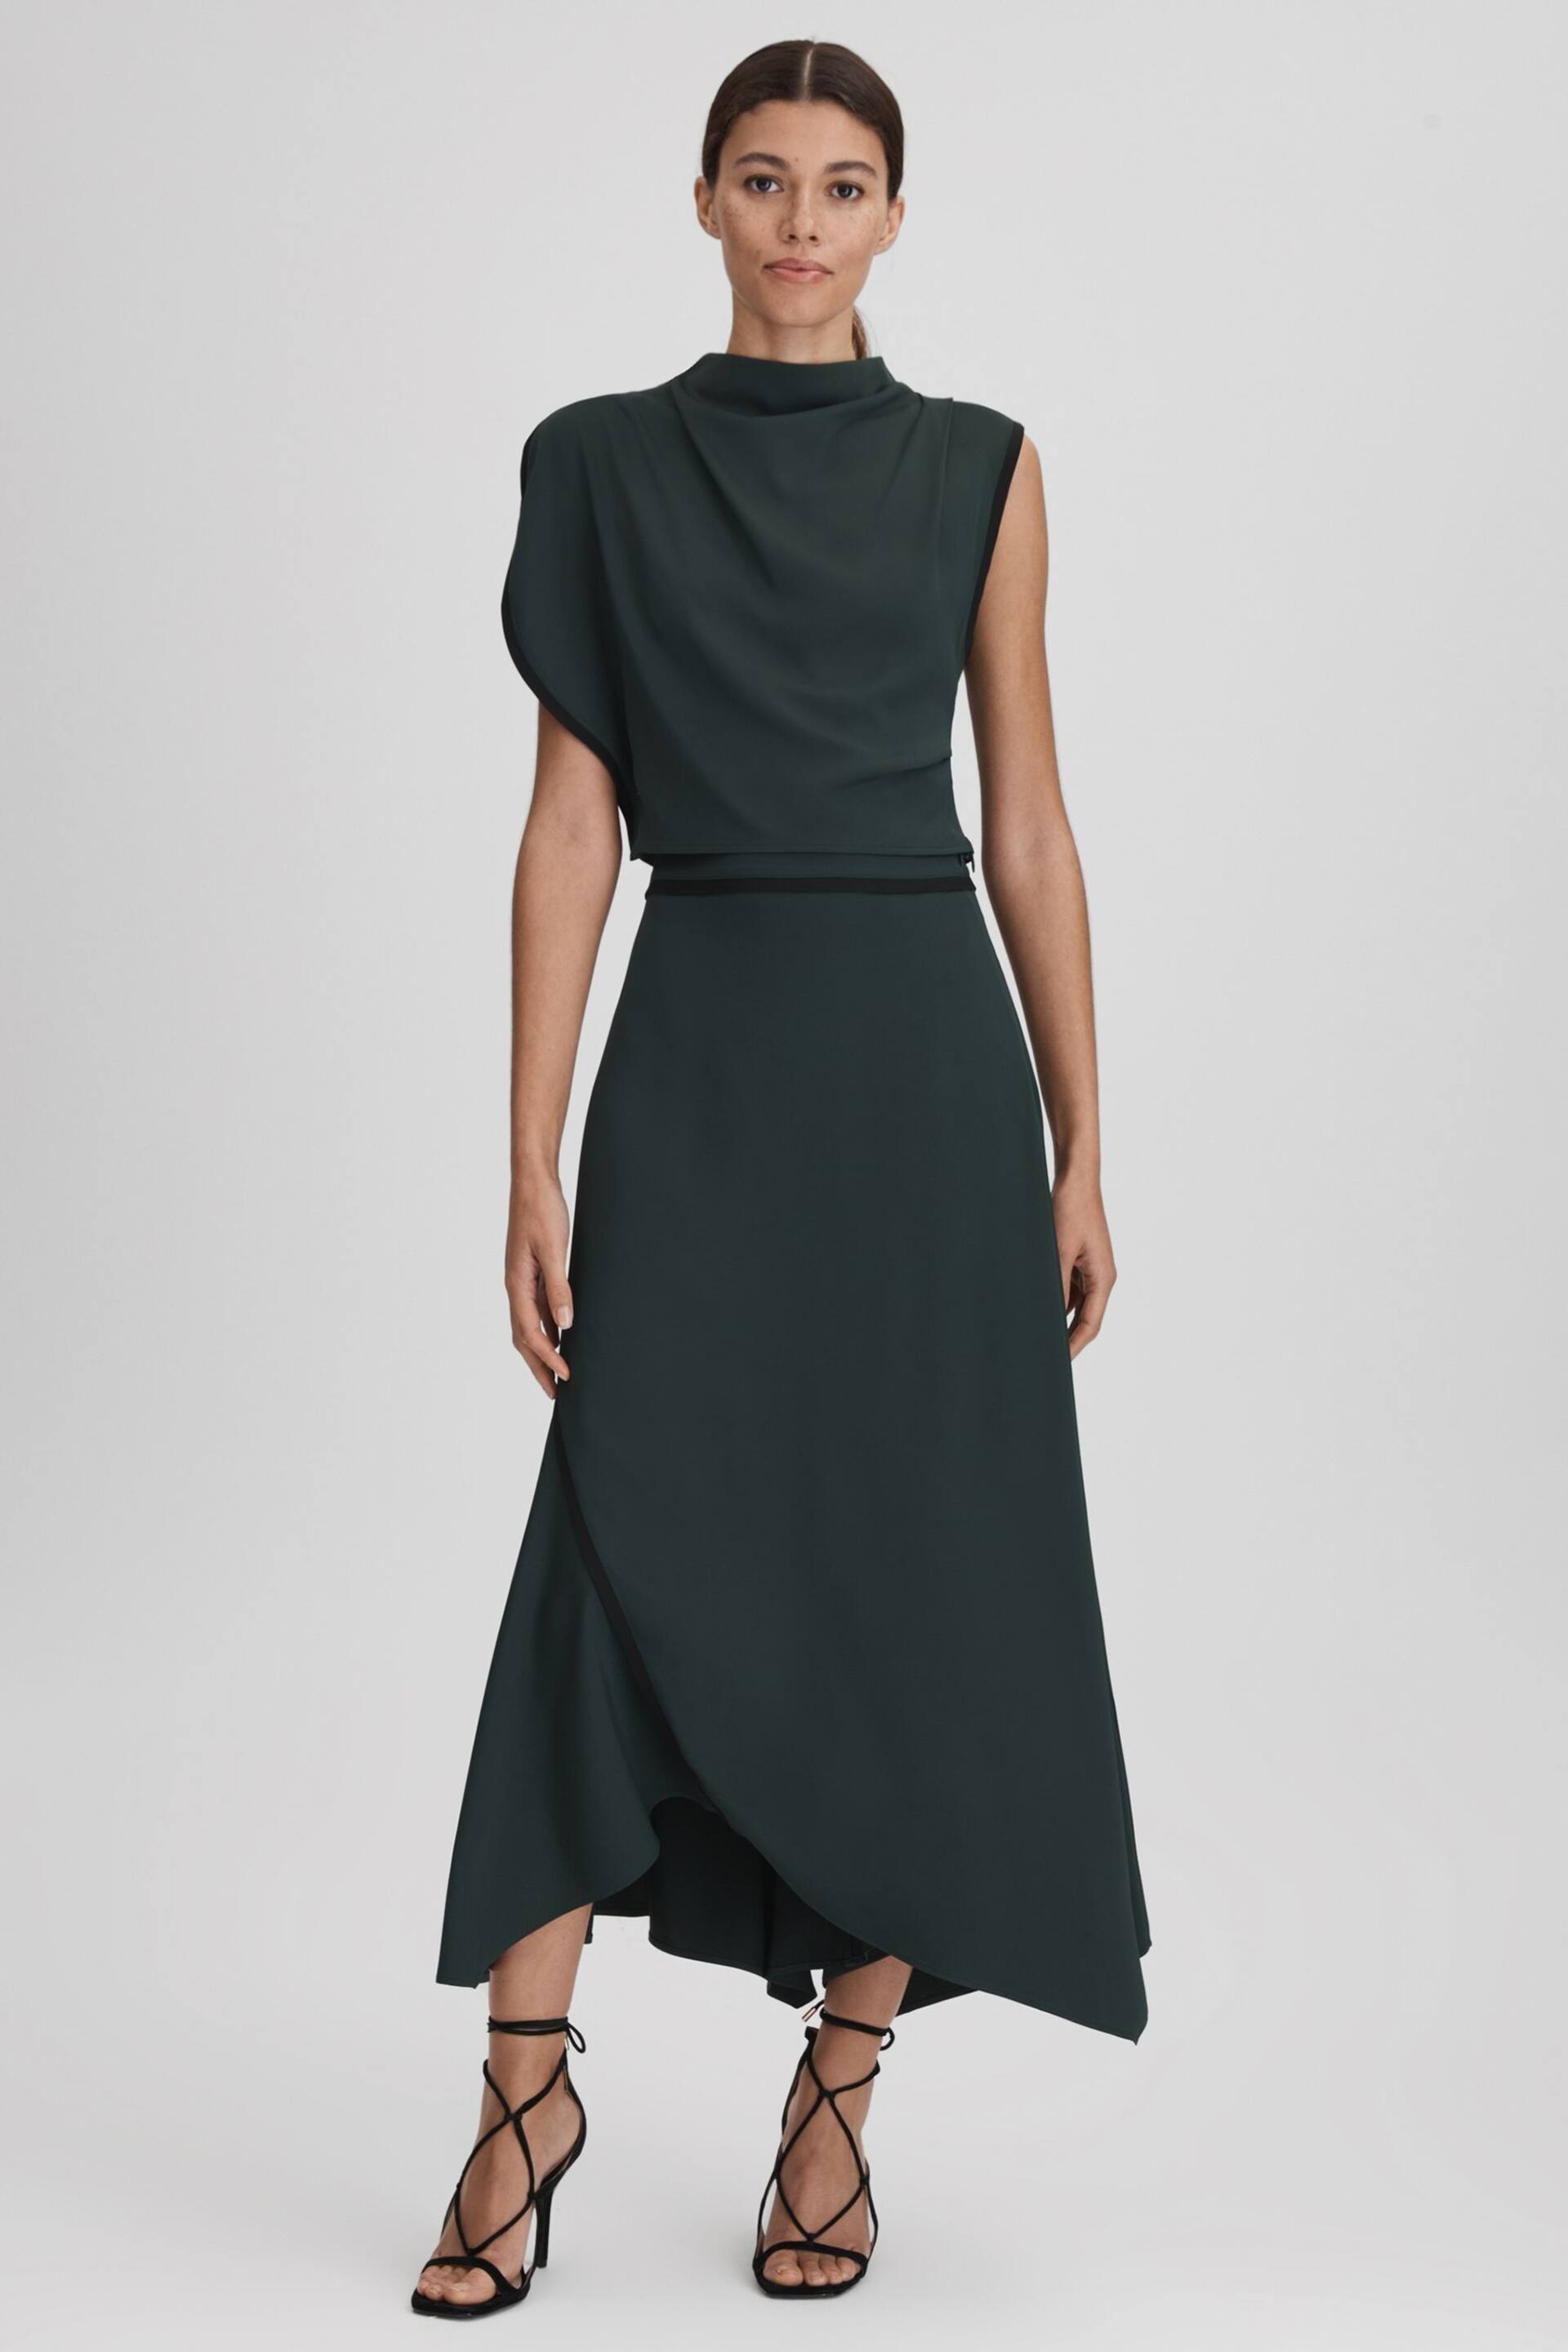 Reiss Green Sara Asymmetric Contrast Trim Cropped Top - Image 1 of 4